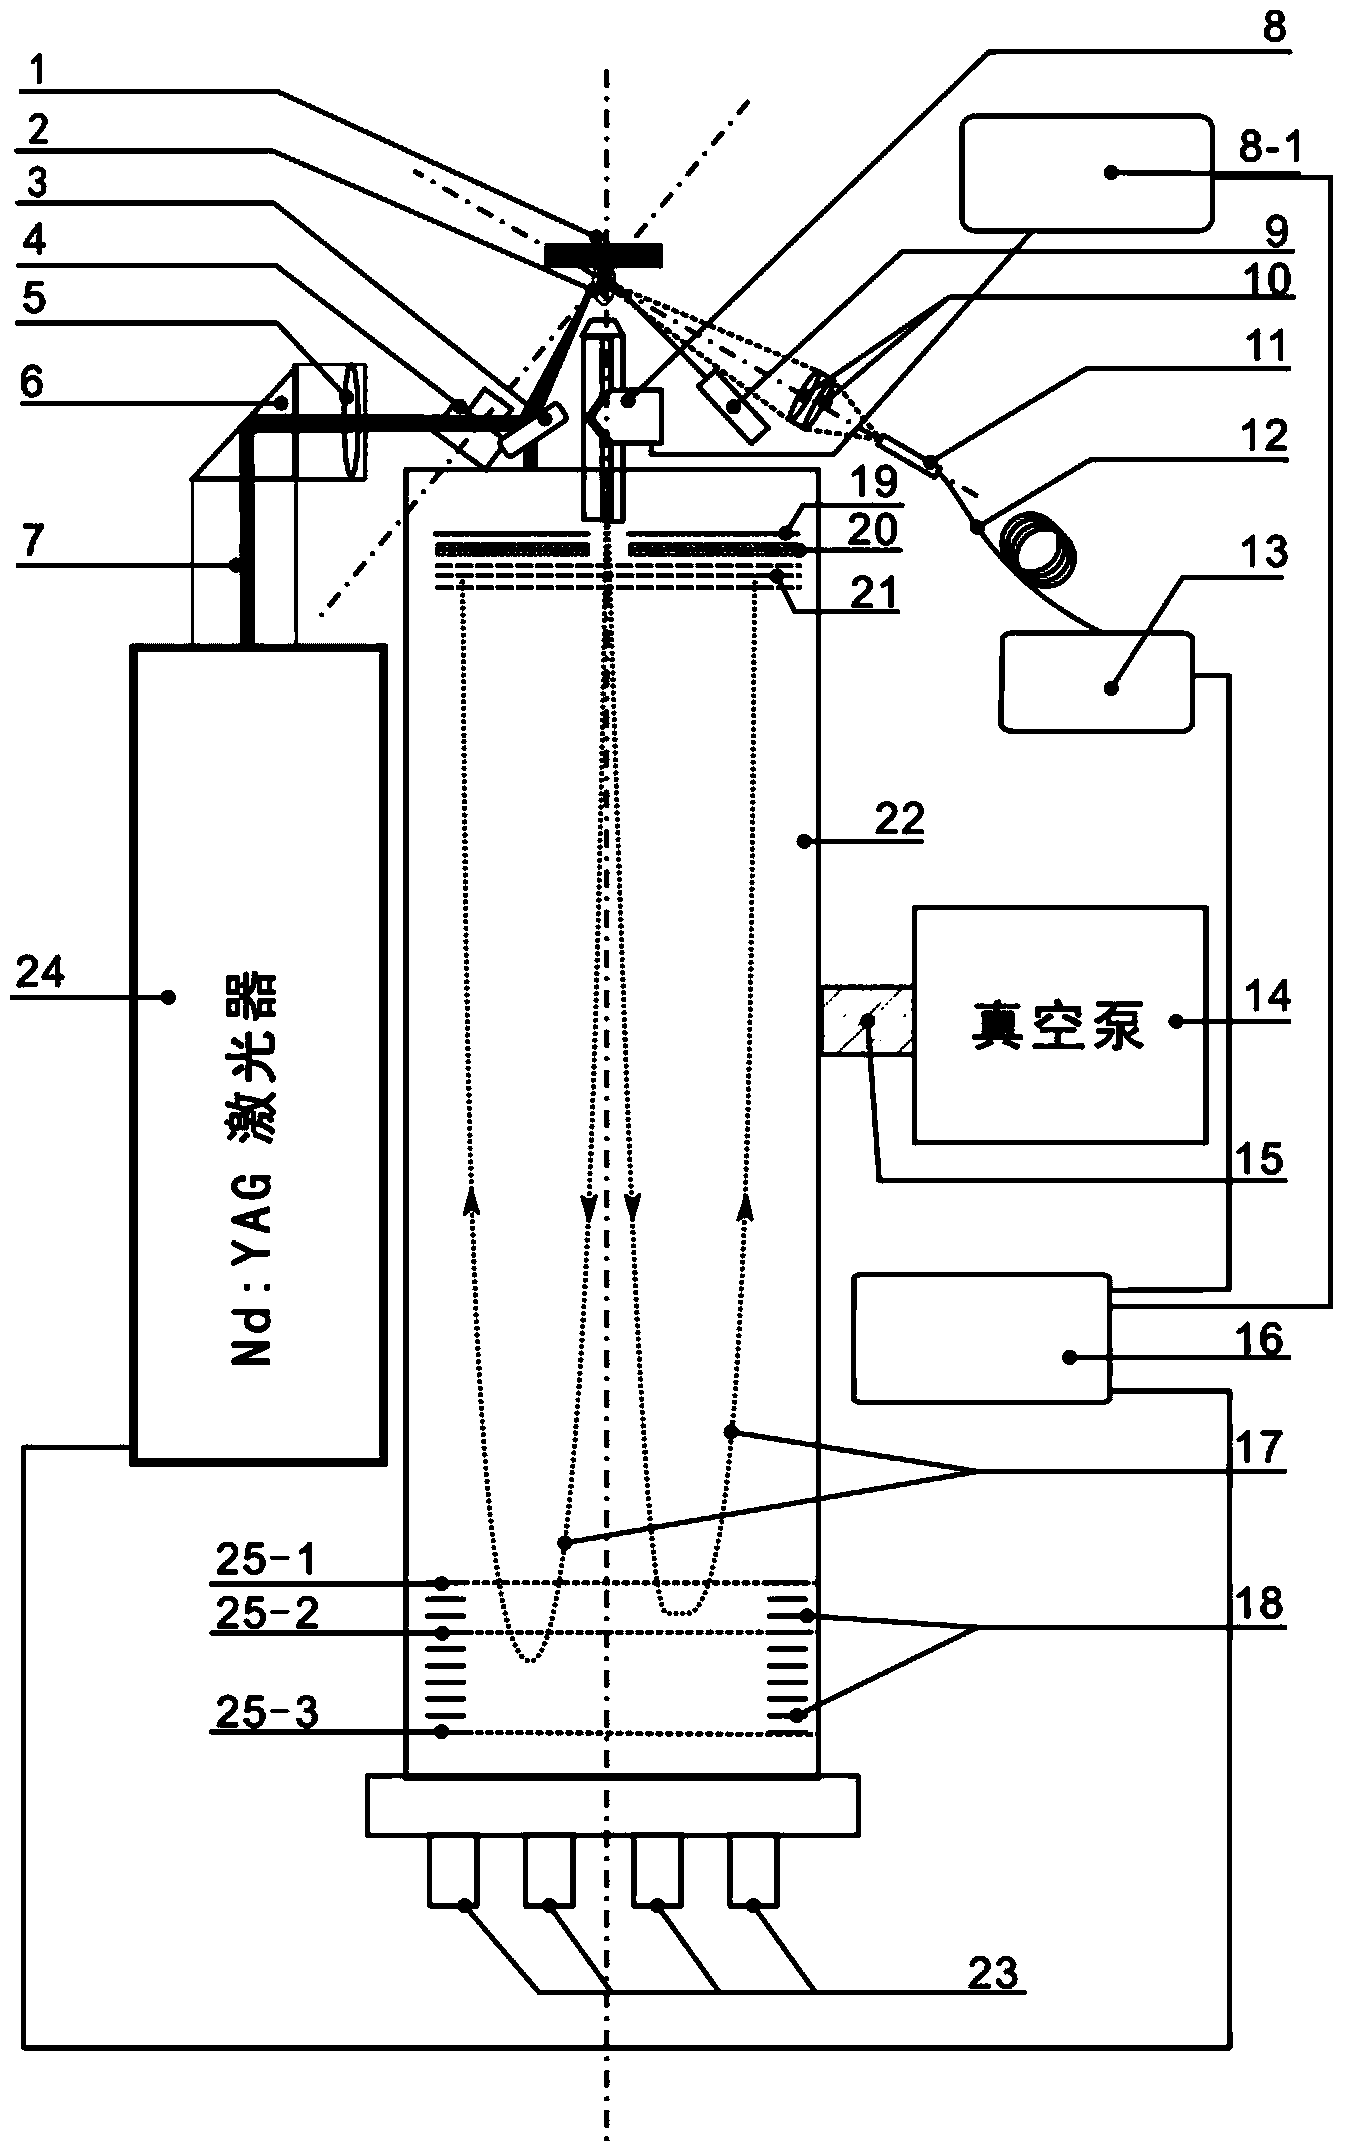 Analyzer for synchronously measuring in-situ laser mass spectrum and light spectrum